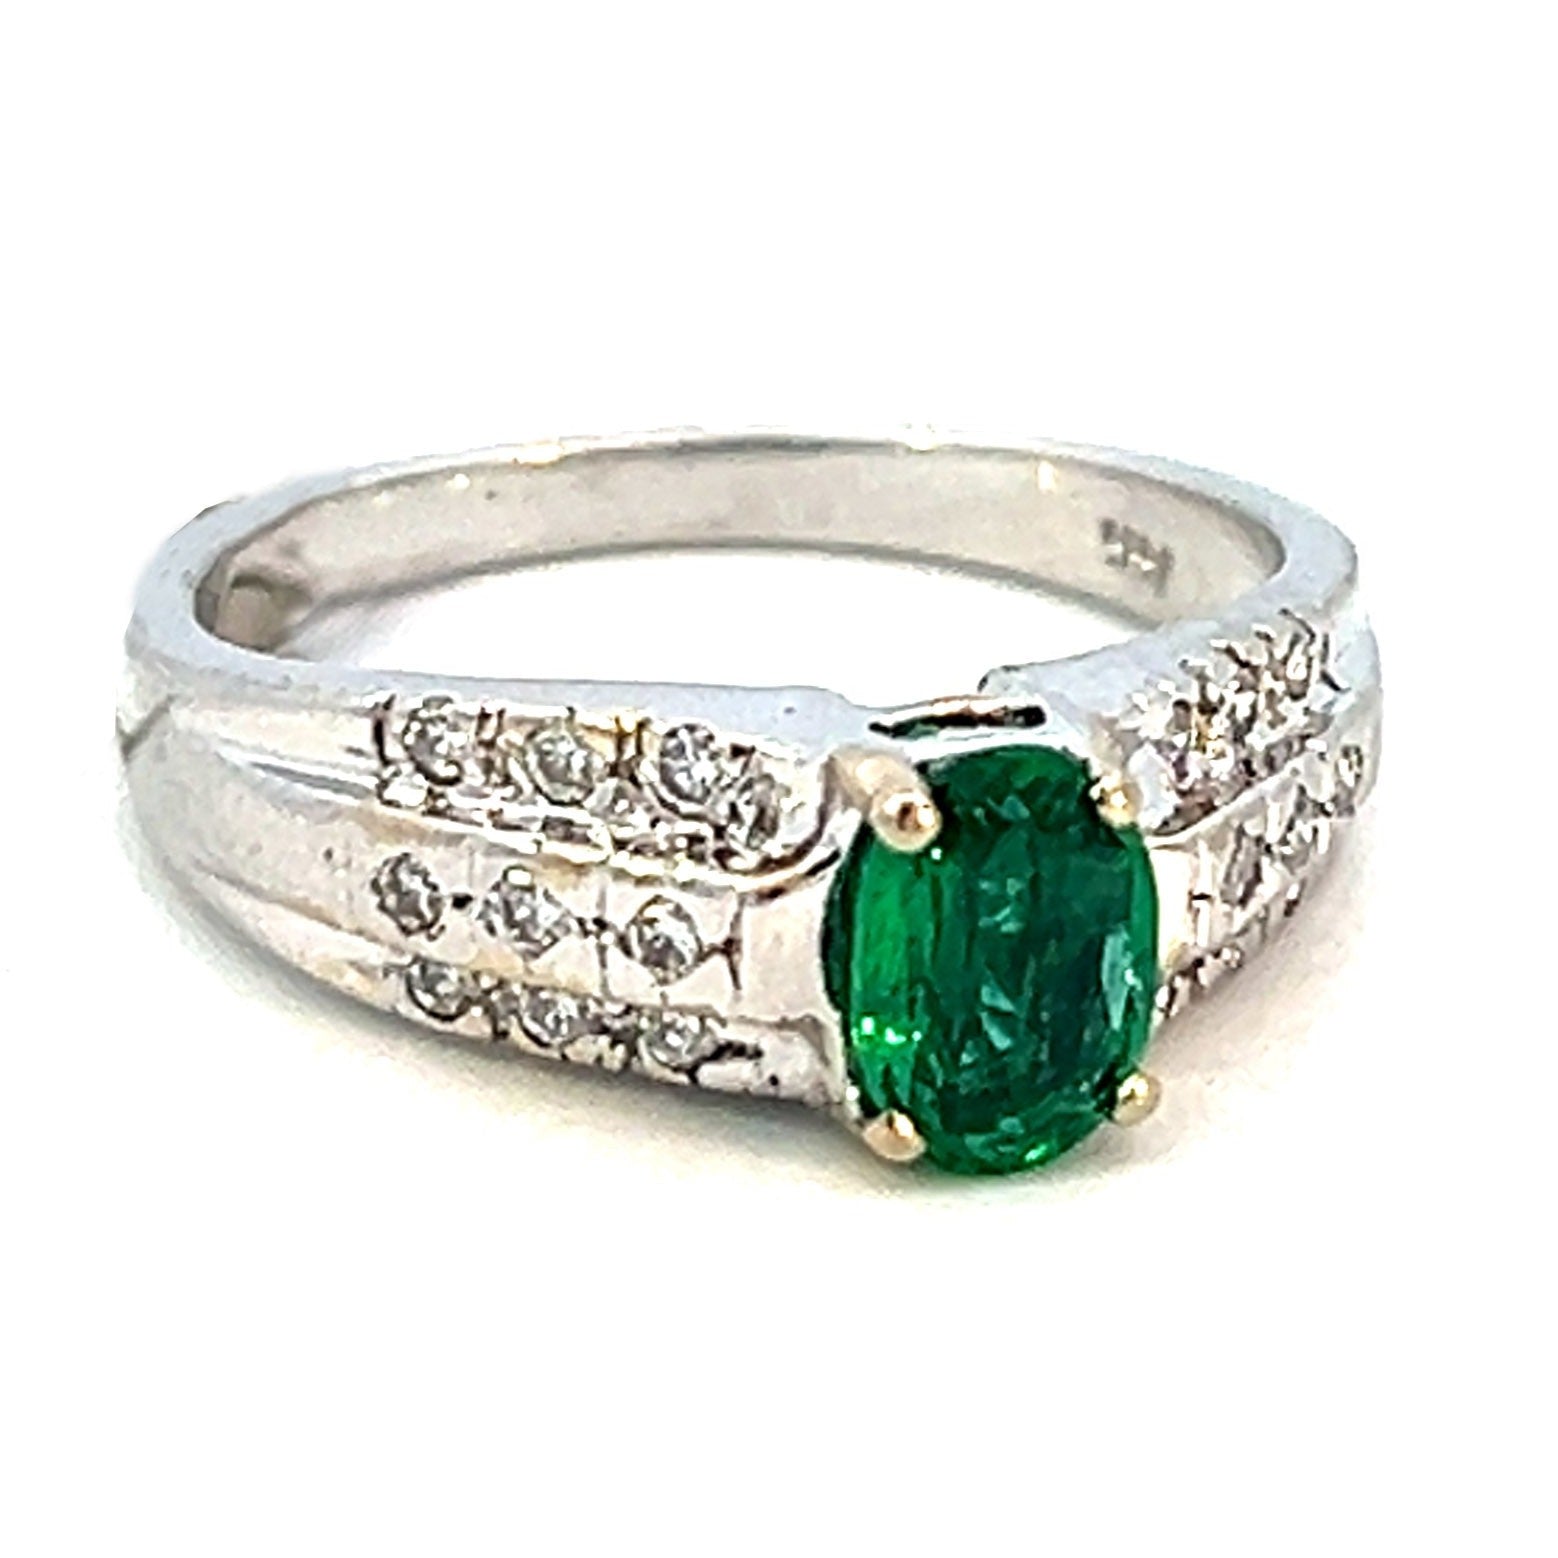 0.31cttw Oval Emerald Ring | Emerald Green Engagement Rings